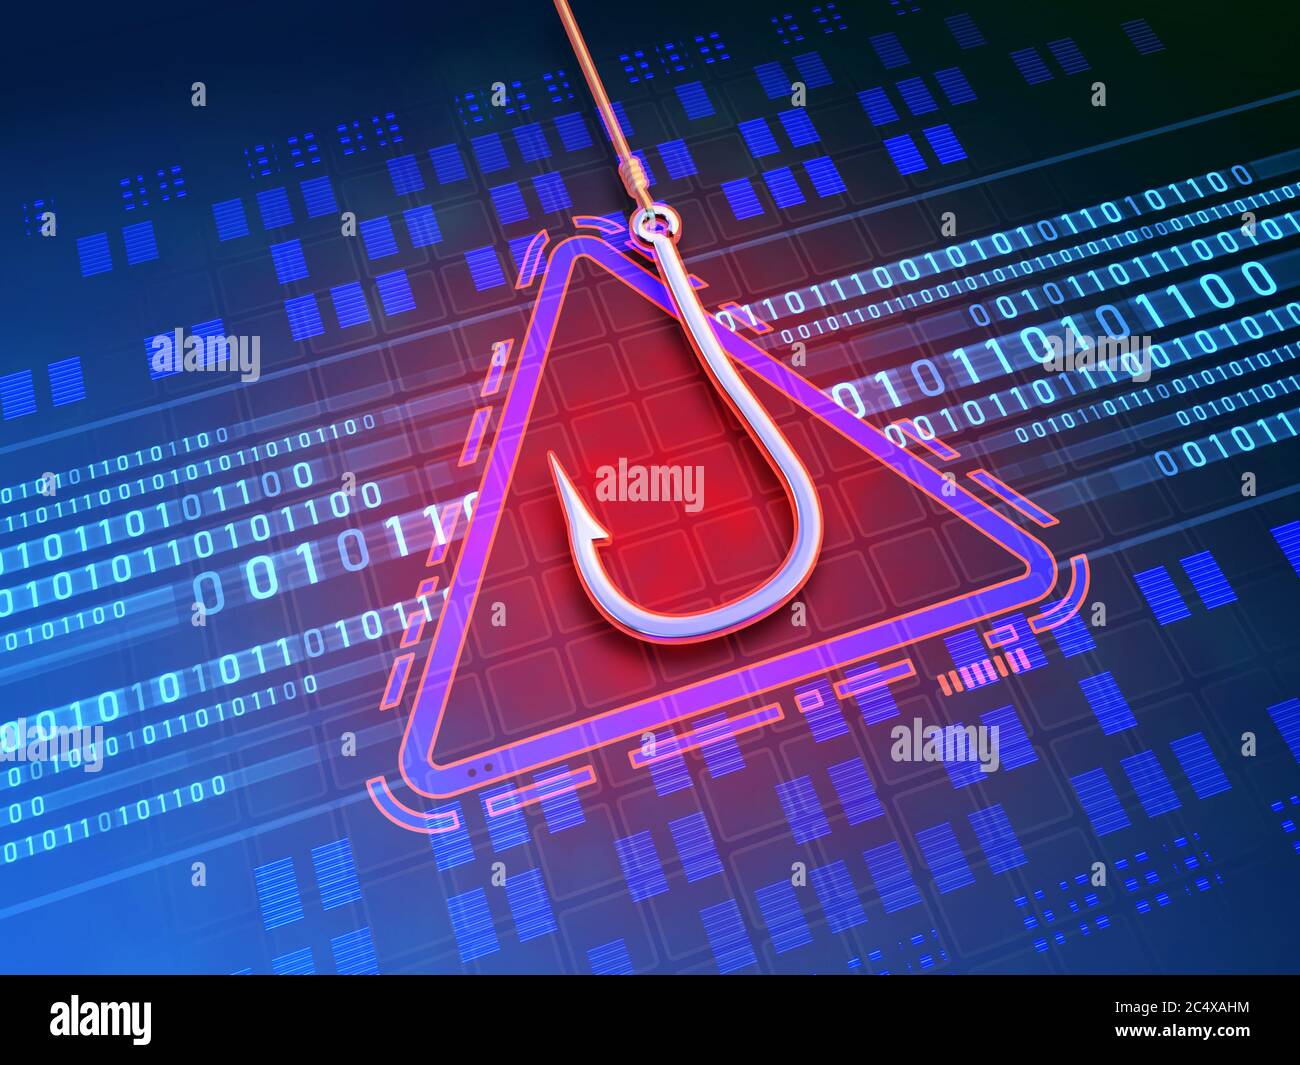 Cyber attack using the phishing technique. 3D illustration. Stock Photo